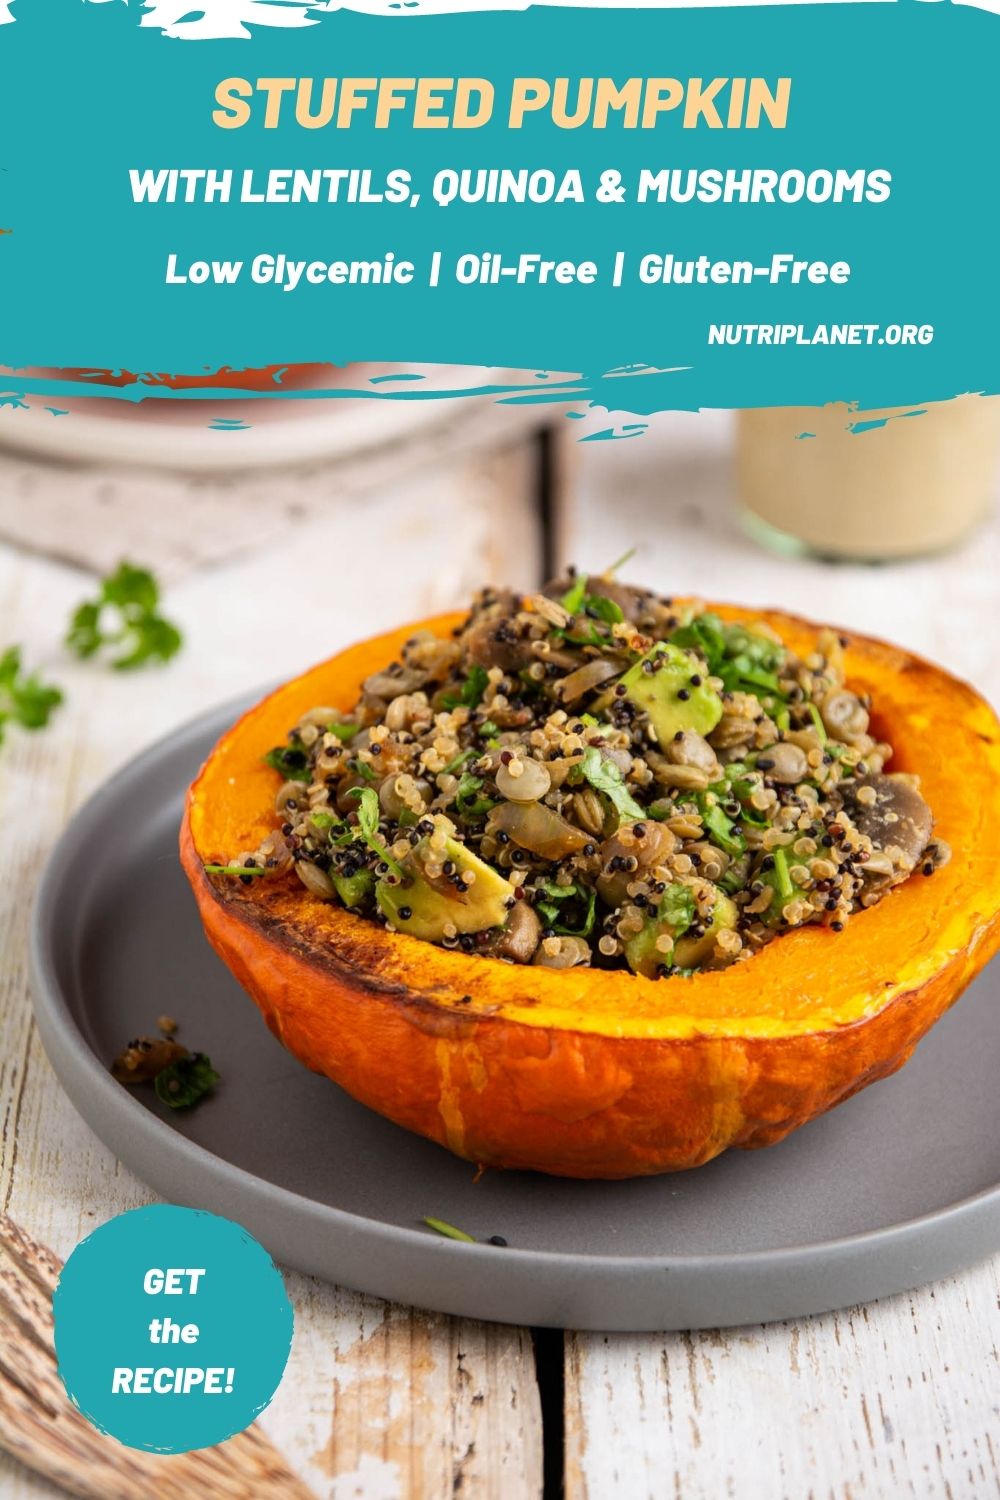 Learn how to make delicious and hearty festive vegan stuffed pumpkin with lentils, quinoa, and mushrooms. Moreover, my creamy and herby cashew-miso dressing will make this dish extra luscious.